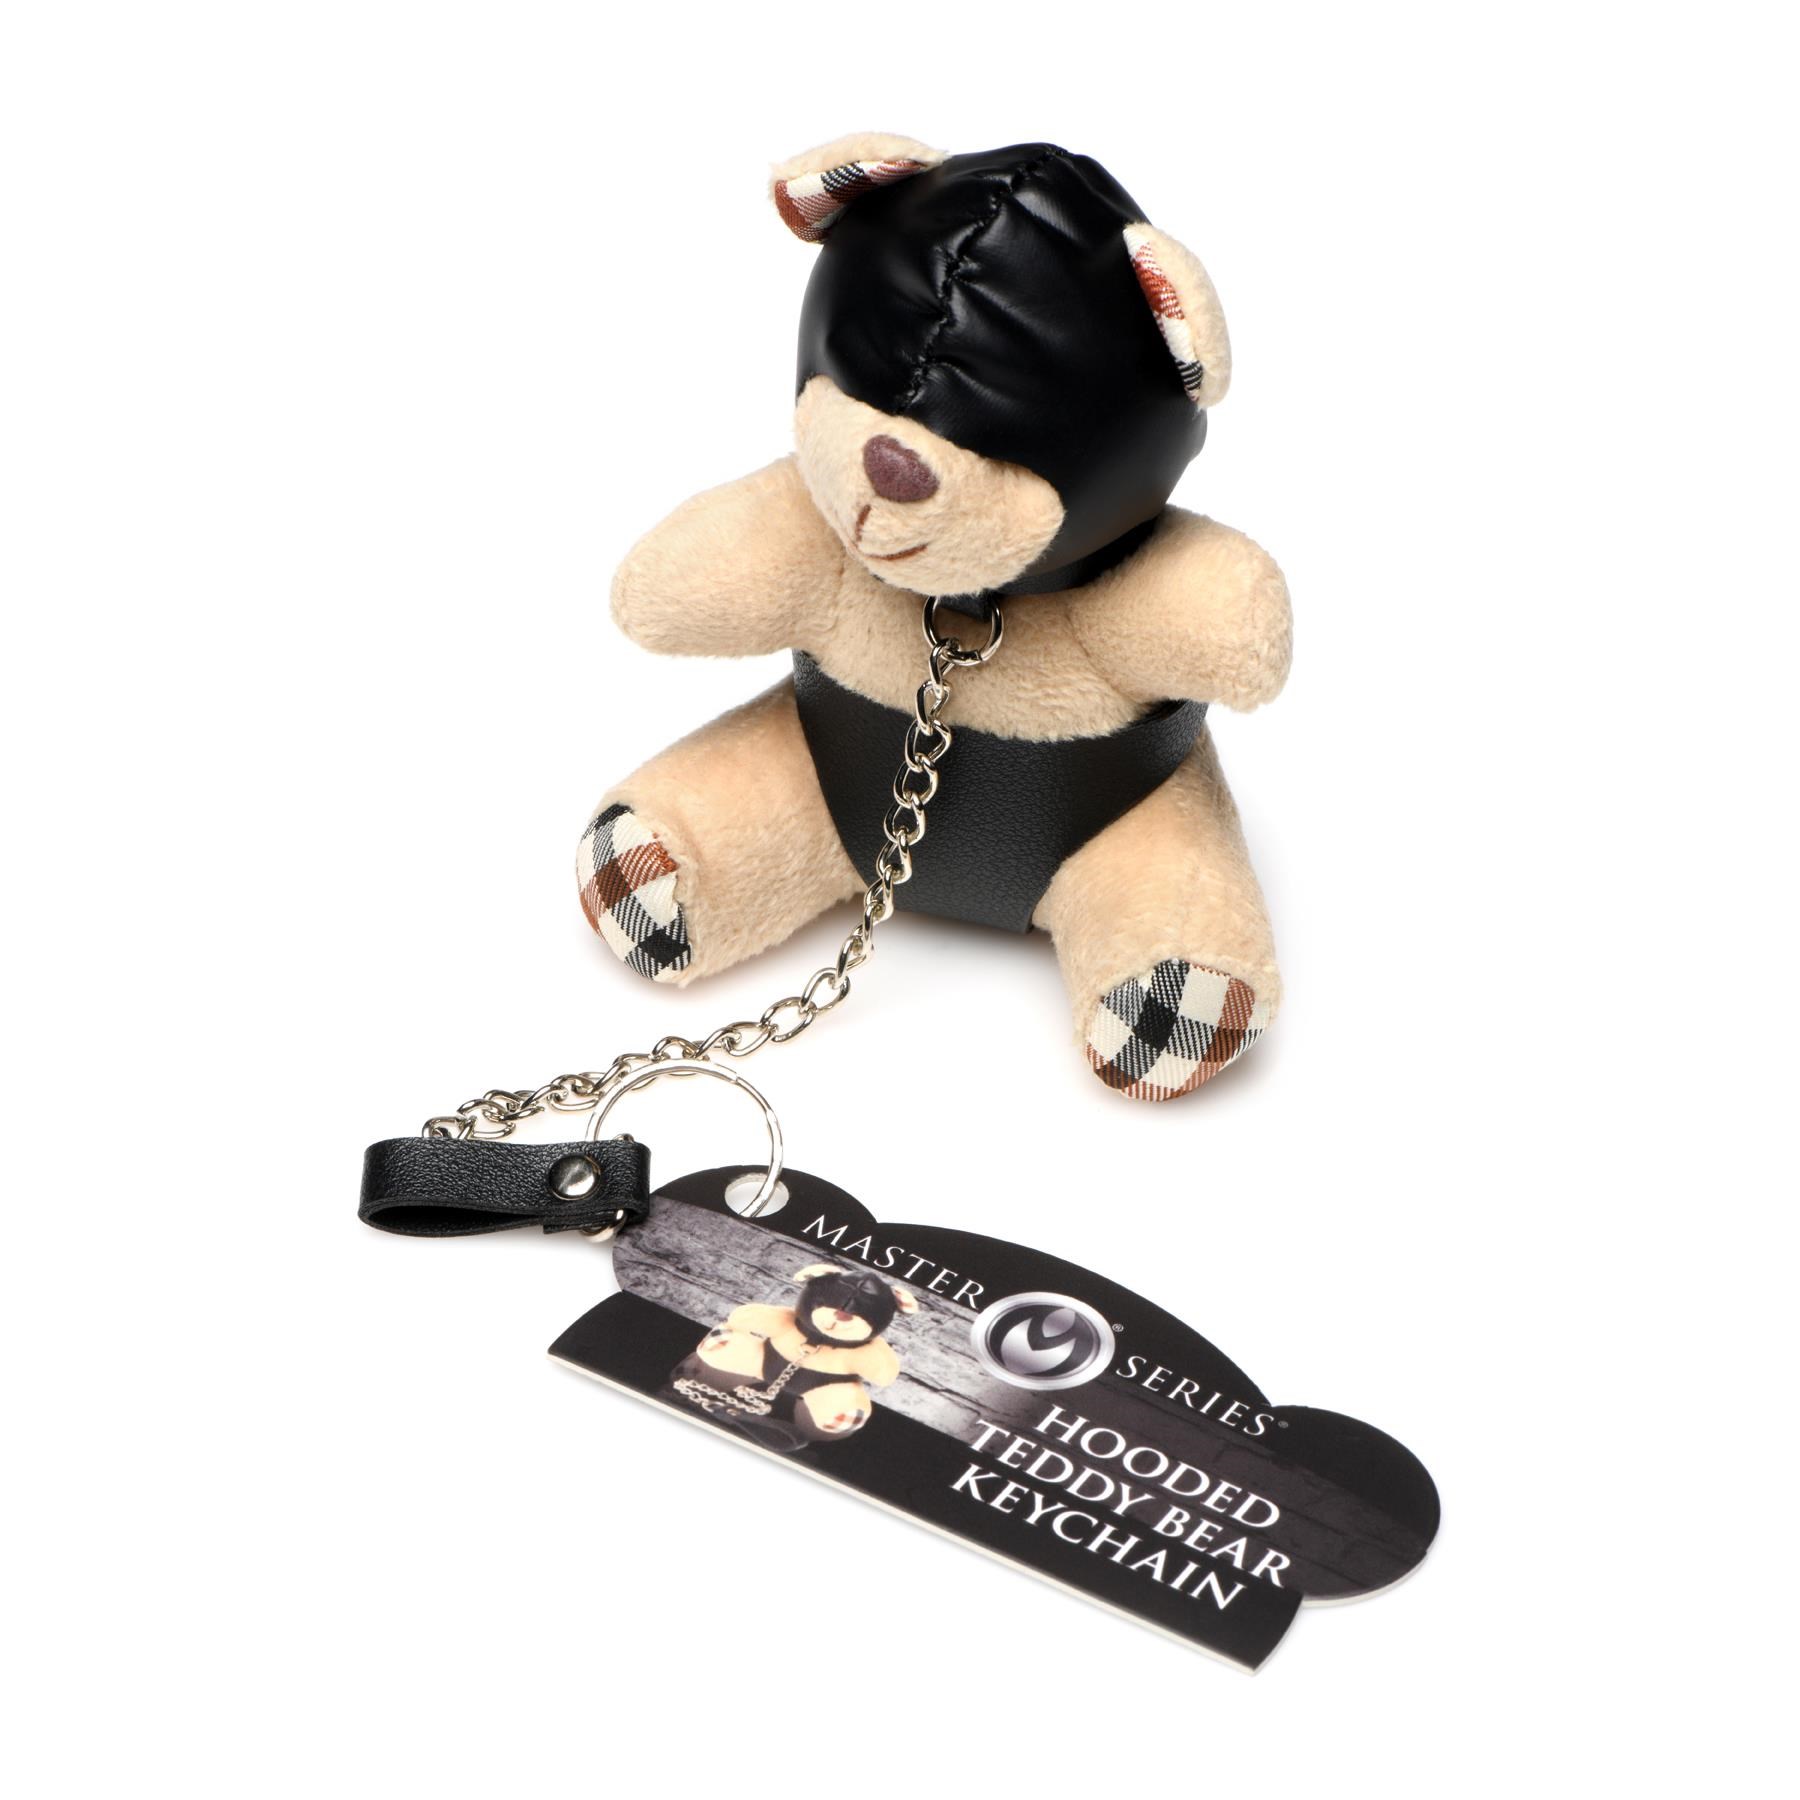 Master Series Hooded Teddy Bear Keychain - With Hang Tag